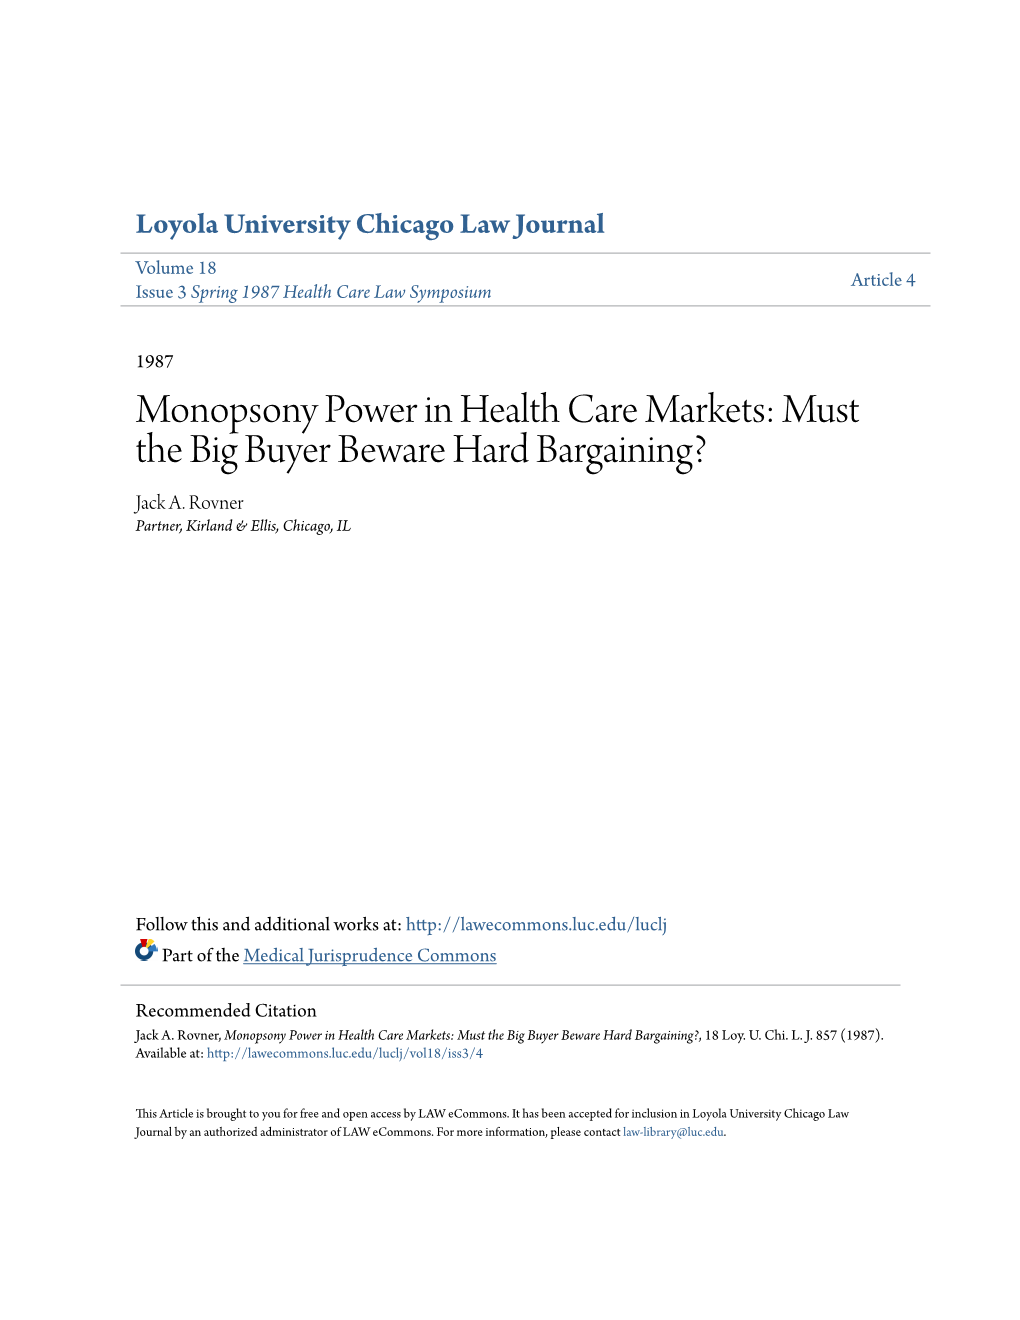 Monopsony Power in Health Care Markets: Must the Big Buyer Beware Hard Bargaining? Jack A